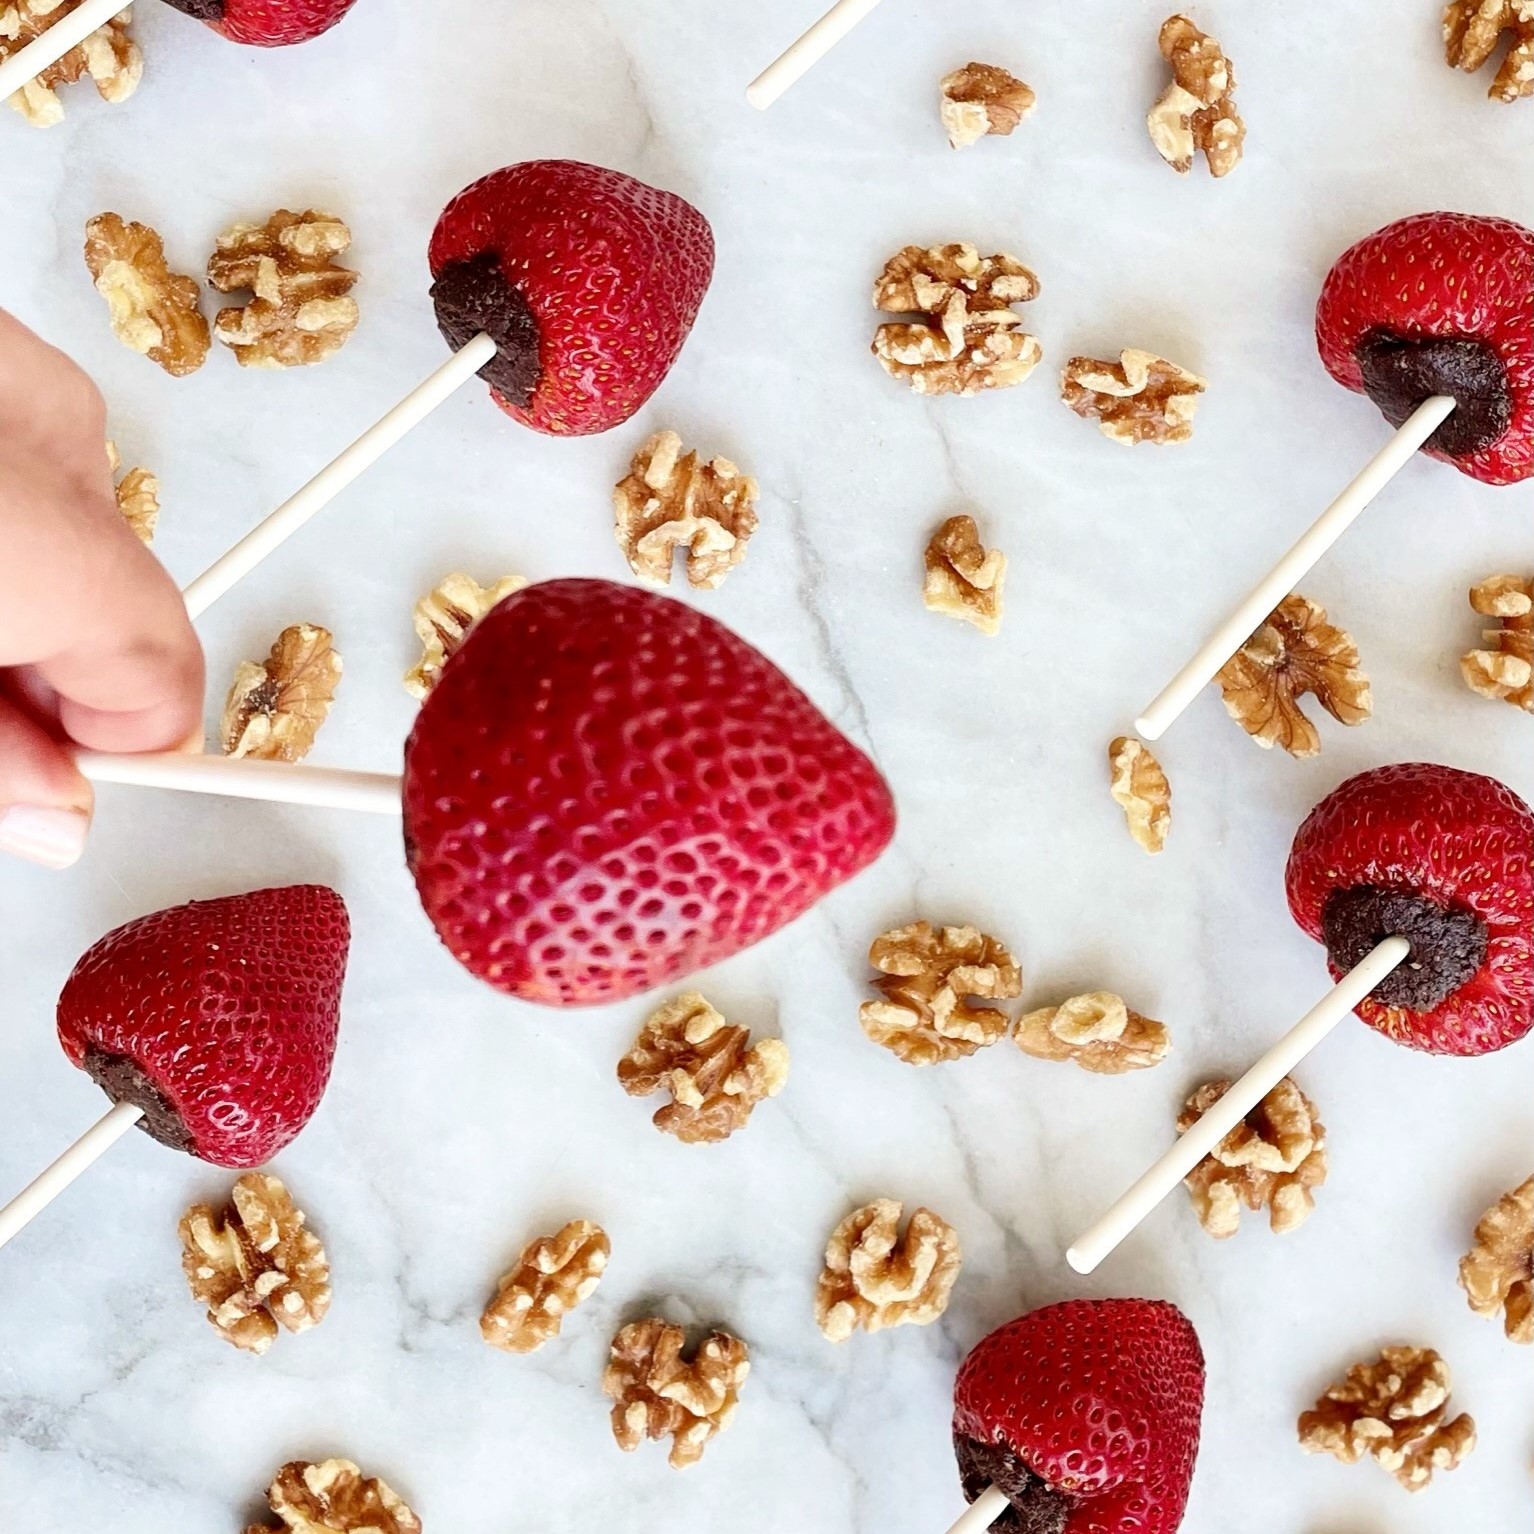 strawberry-walnut lollipops in background and holding one closeup